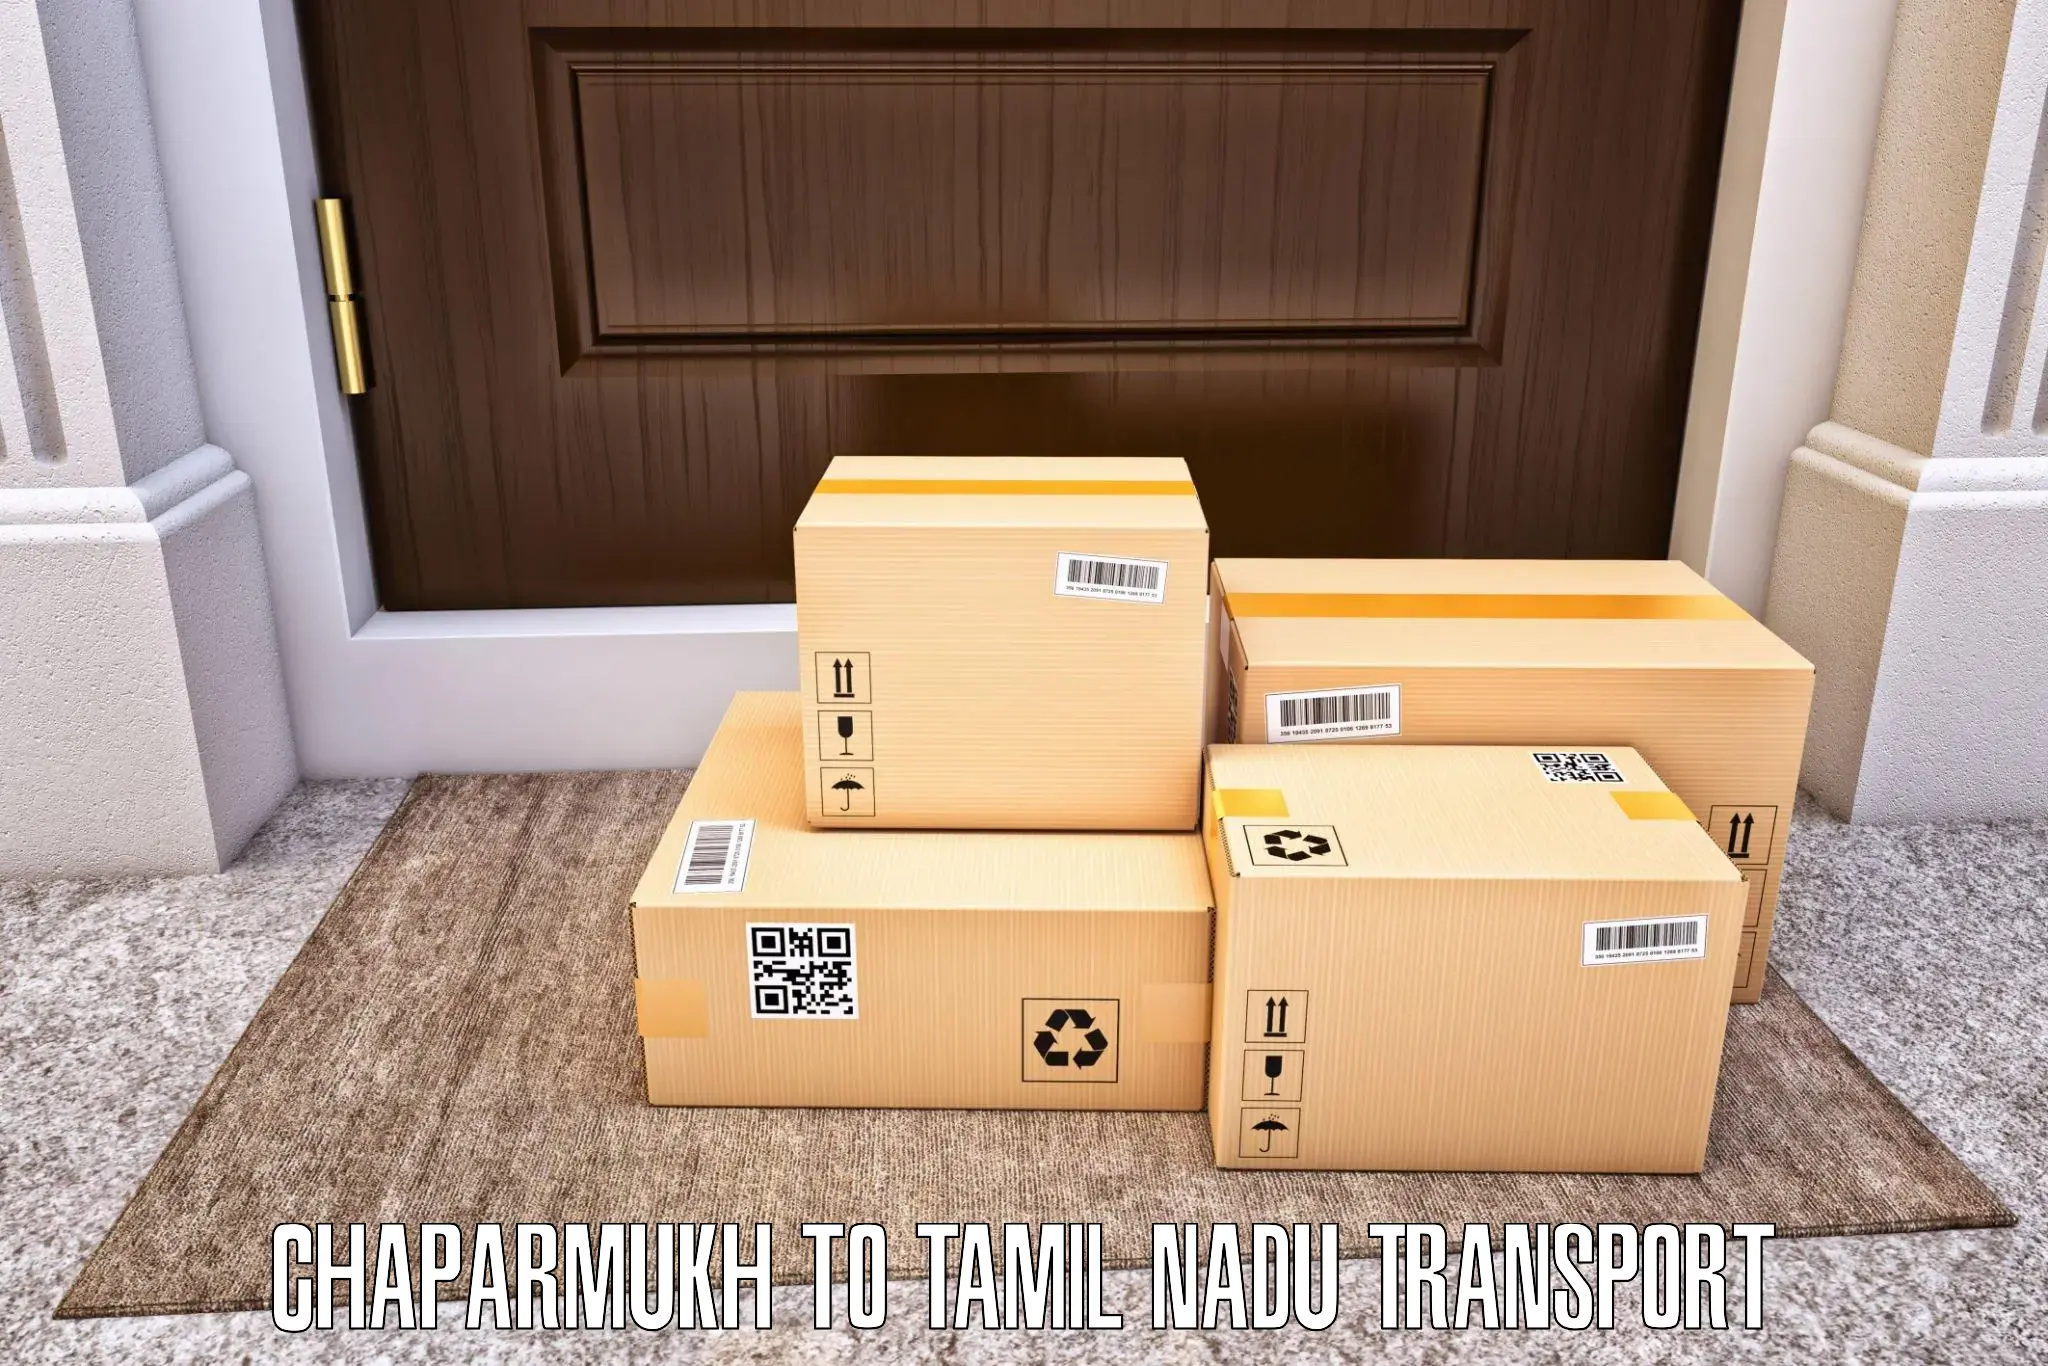 Transportation solution services Chaparmukh to Vallioor